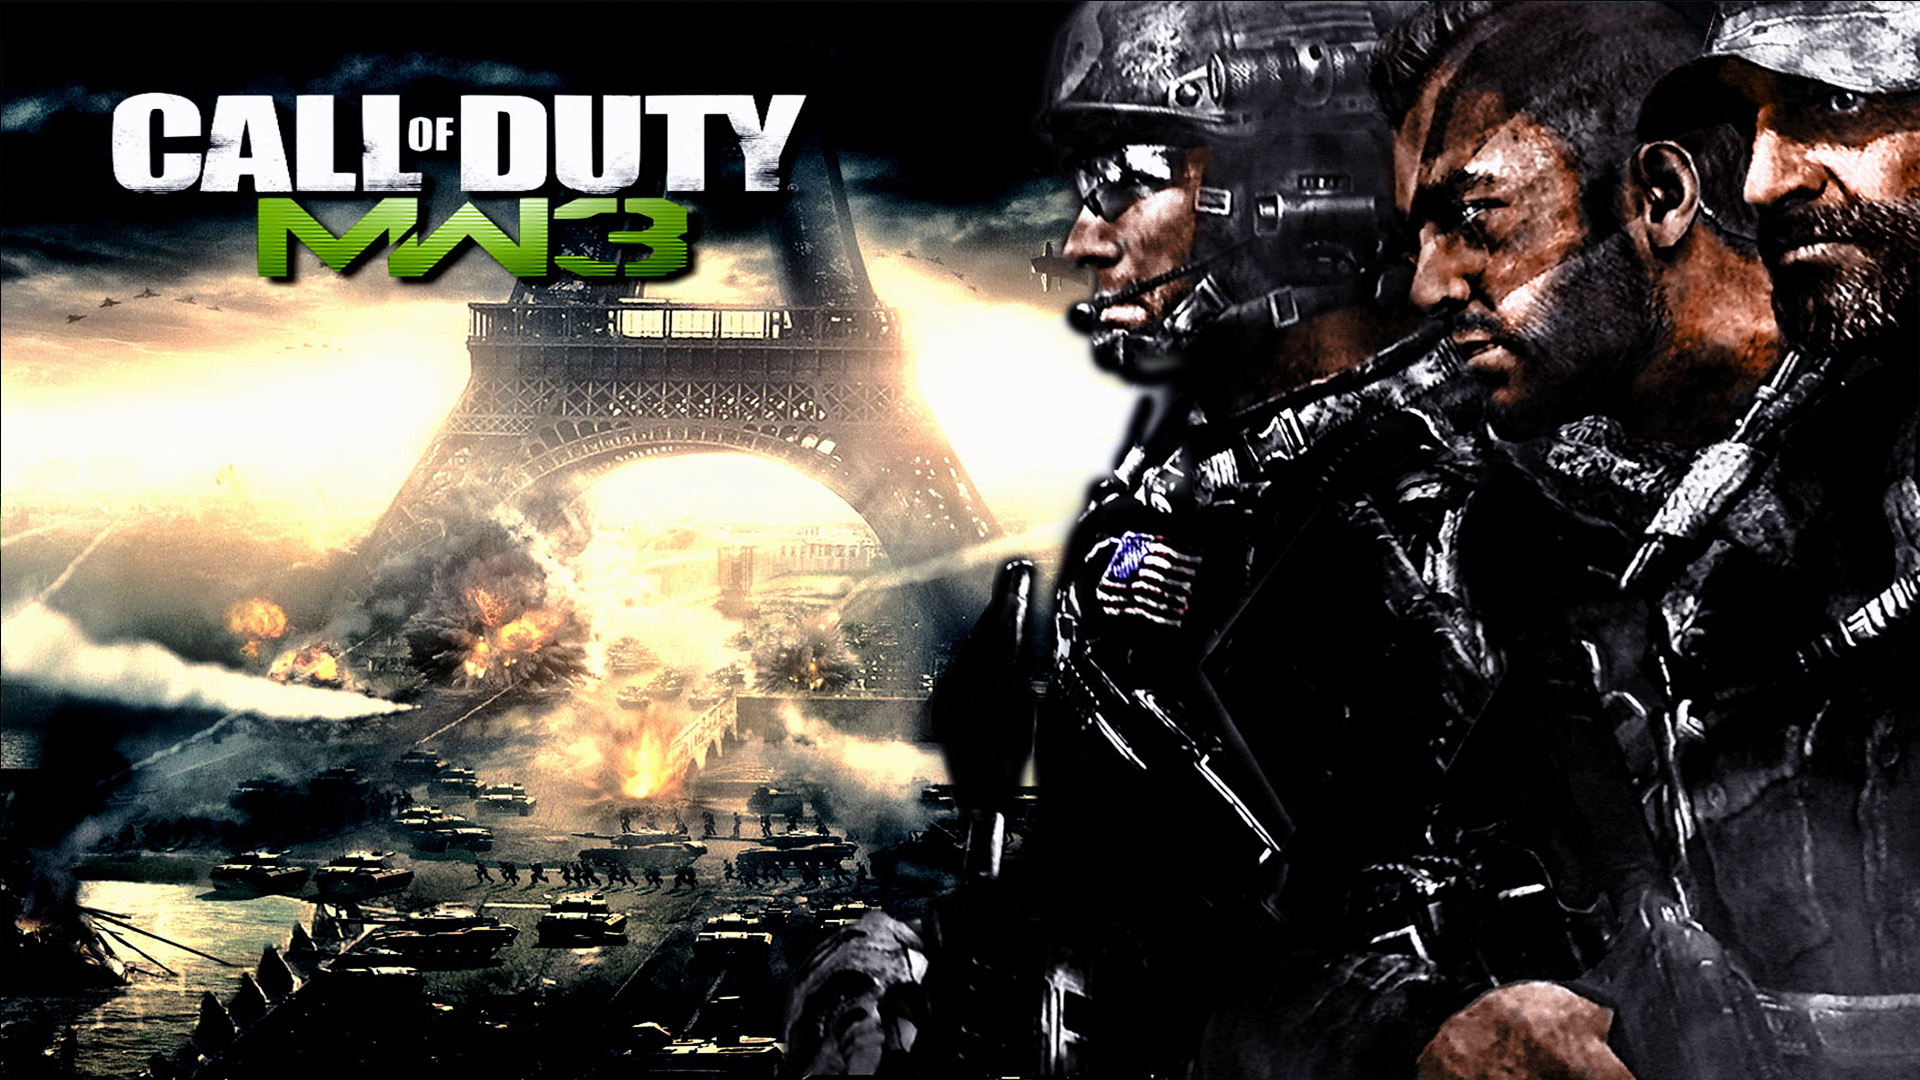 wallpapers de call of duty,action adventure game,movie,shooter game,action film,pc game